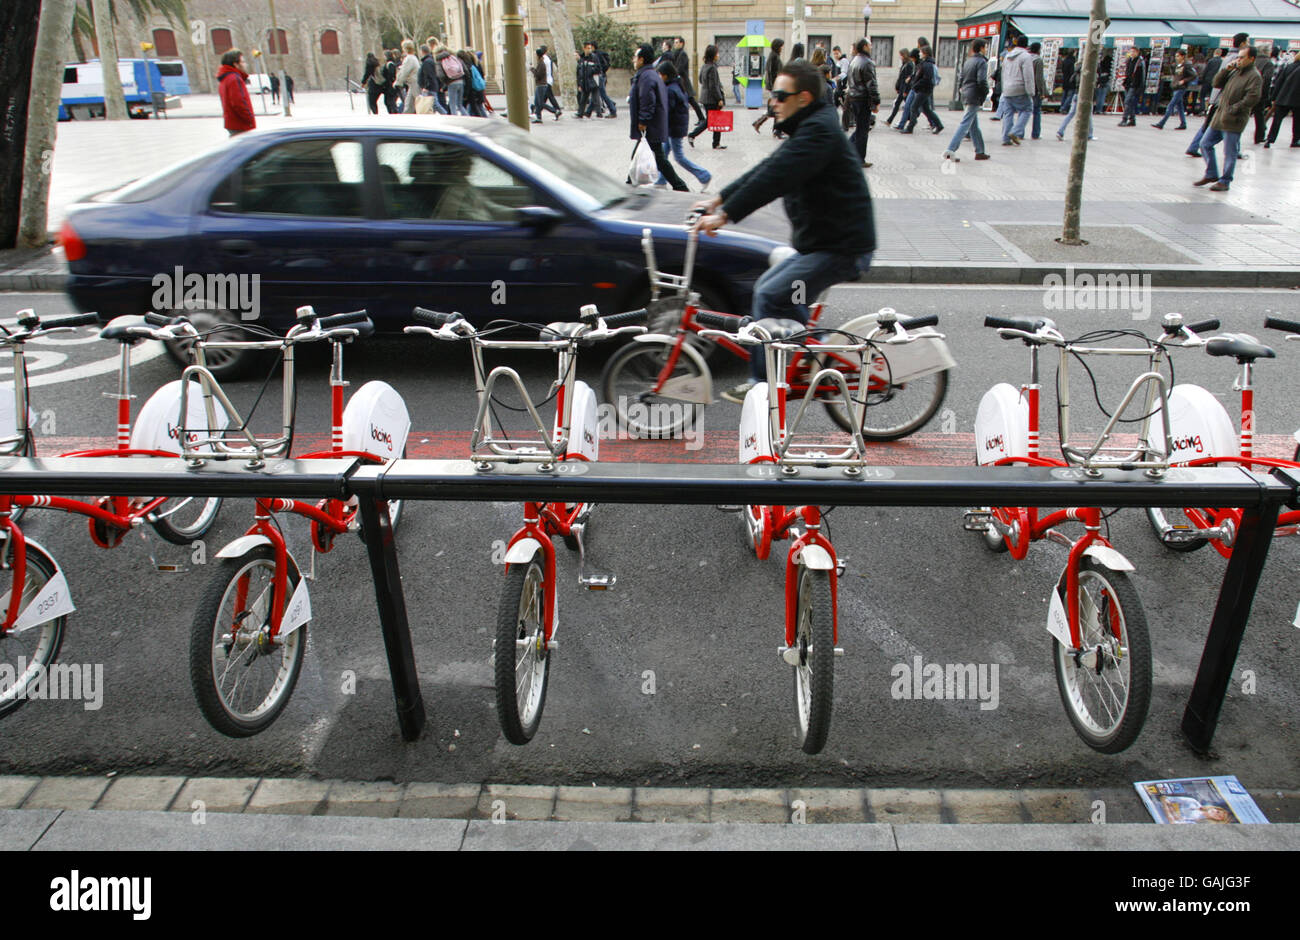 People in Barcelona, Spain using hired bicycles to get about the city. The new scheme called Bicing enables registered users to take a cycle from any of the 100 automated stations in the Catalan capital and make a journey of up to two hours before returning it to any other station. The bikes' front baskets are locked to a rail which releases when an electronic card is placed against the machine consul. The system is promoted as an extra form of public transport and costs just 0.3 euros per 30 minutes plus an annual charge of 24 euros. Stock Photo